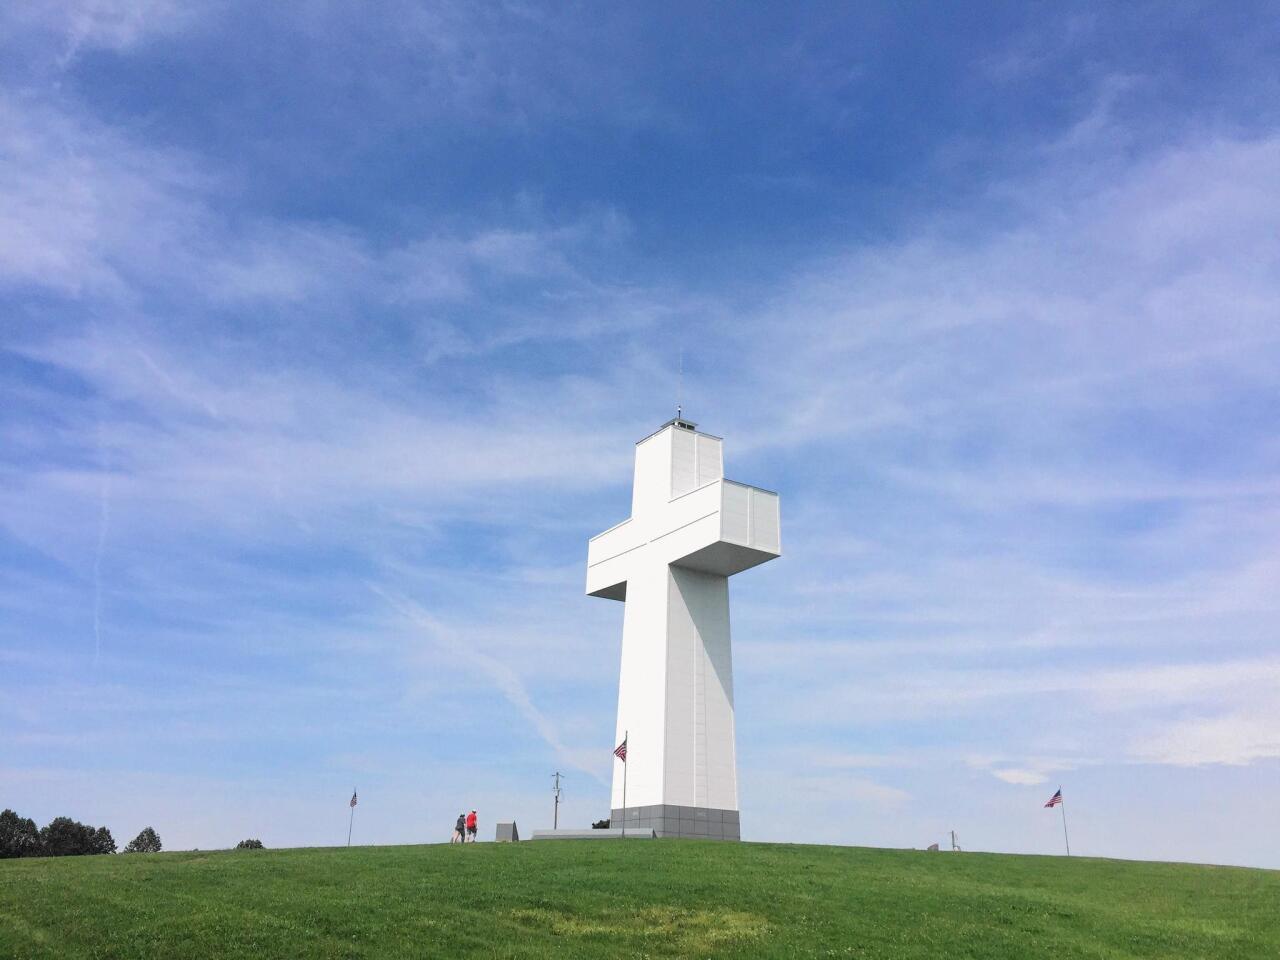 Bald Knob Cross in Alto Pass is a prime spot to watch the total solar eclipse roll in. Tickets for a spot by the cross cost $50 to $250 a person.